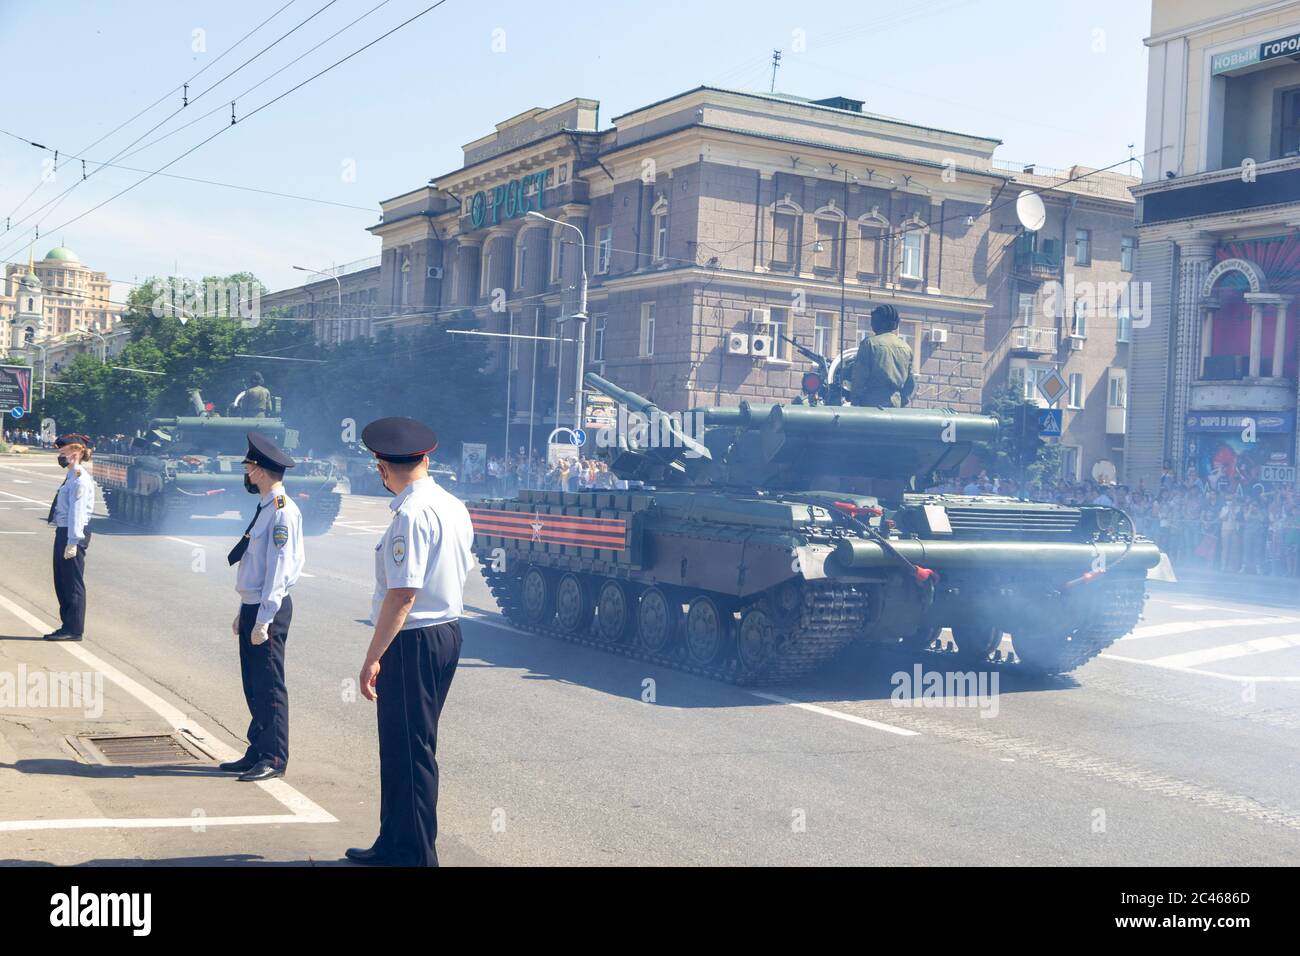 Donetsk, Donetsk People Republic, Ukraine - June 24, 2020: Armored heavy Soviet tanks move along the main street of the city during the Victory Parade Stock Photo